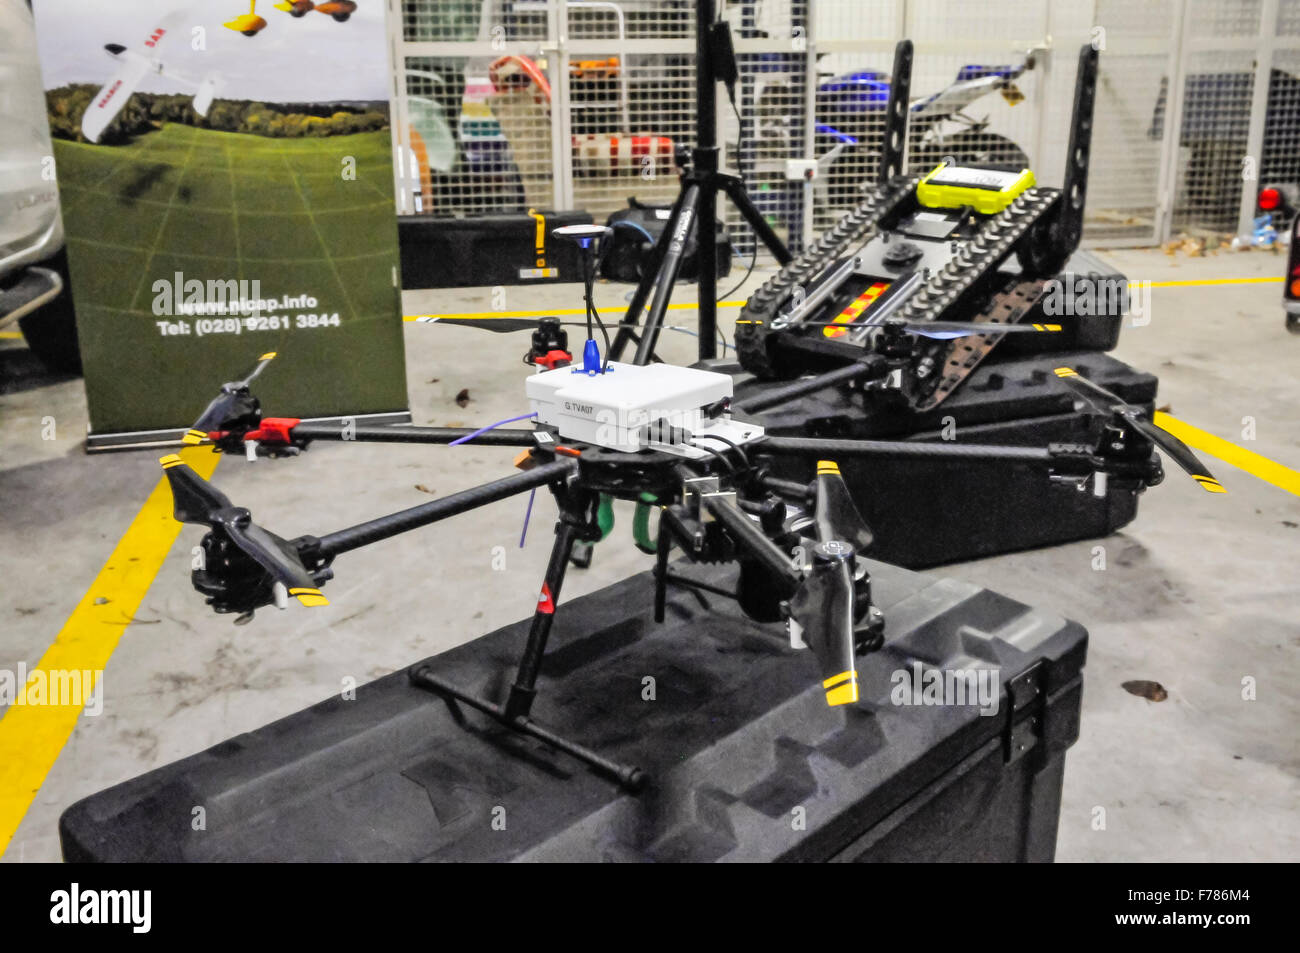 Northern Ireland. 26th November, 2015. A camera equipped drone used during search and rescue operations. Credit:  Stephen Barnes/Alamy Live News Stock Photo